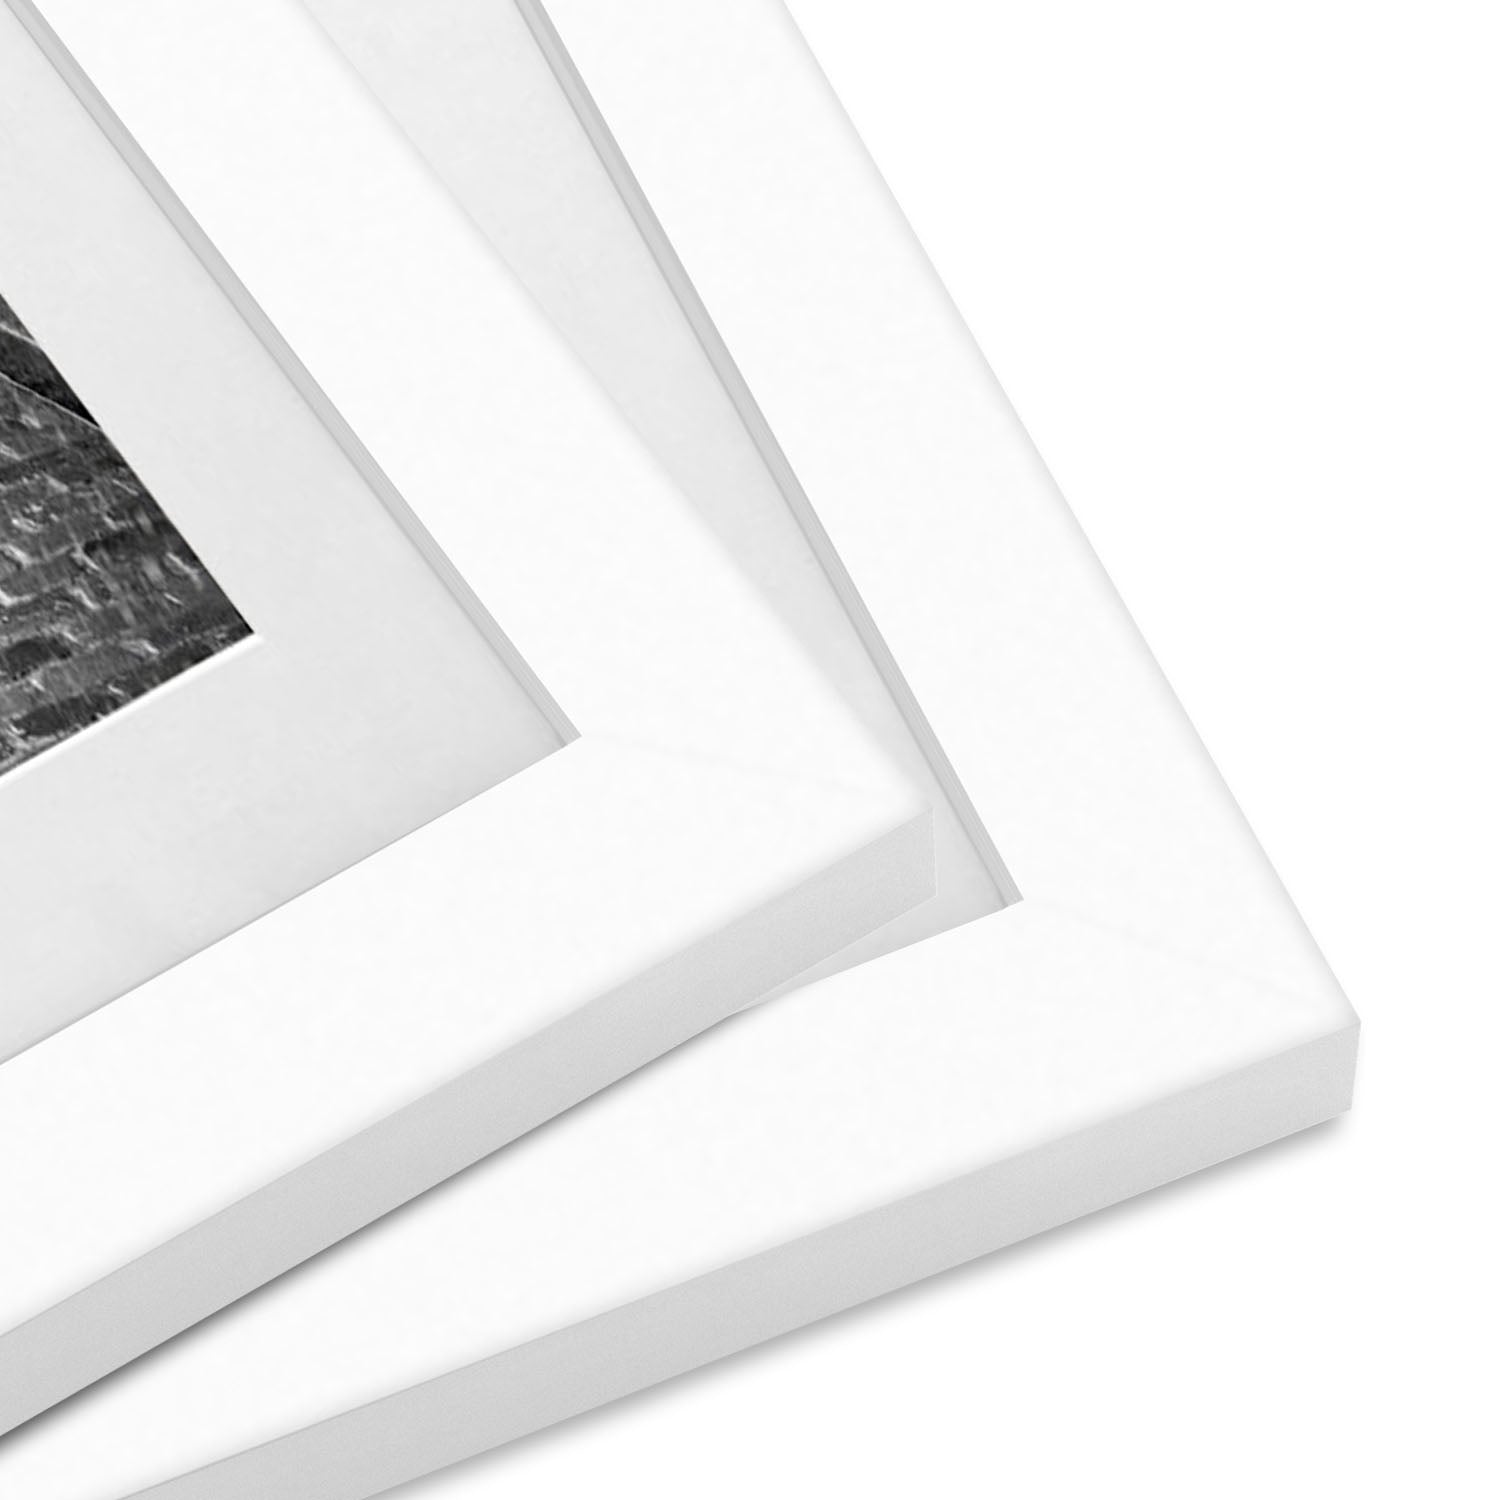 Americanflat 5 Pack of 8x10 Frames with 5x7 Mat - Plexiglass Cover - White, Size: 8 inch x 10 inch